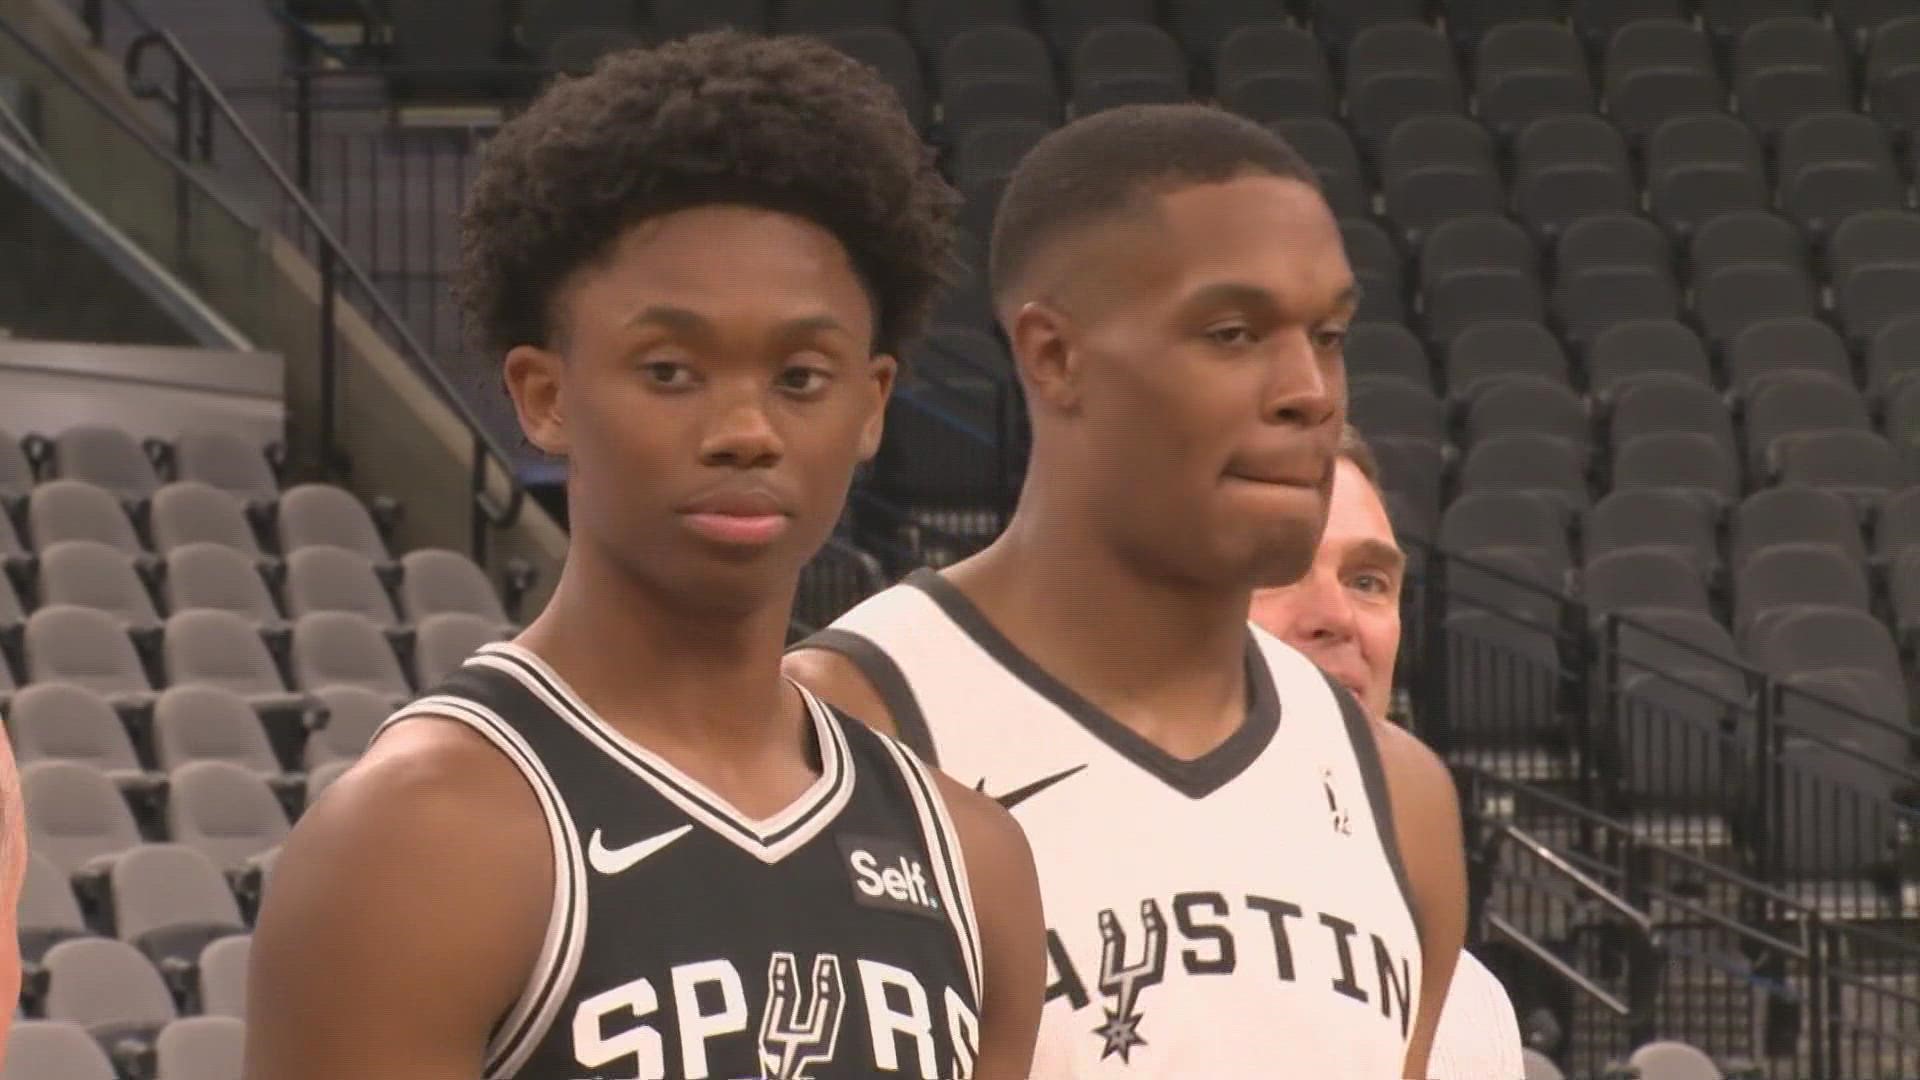 KENS 5 has confirmed via court records that the Spurs were removed from the lawsuit filed in Bexar County district court.